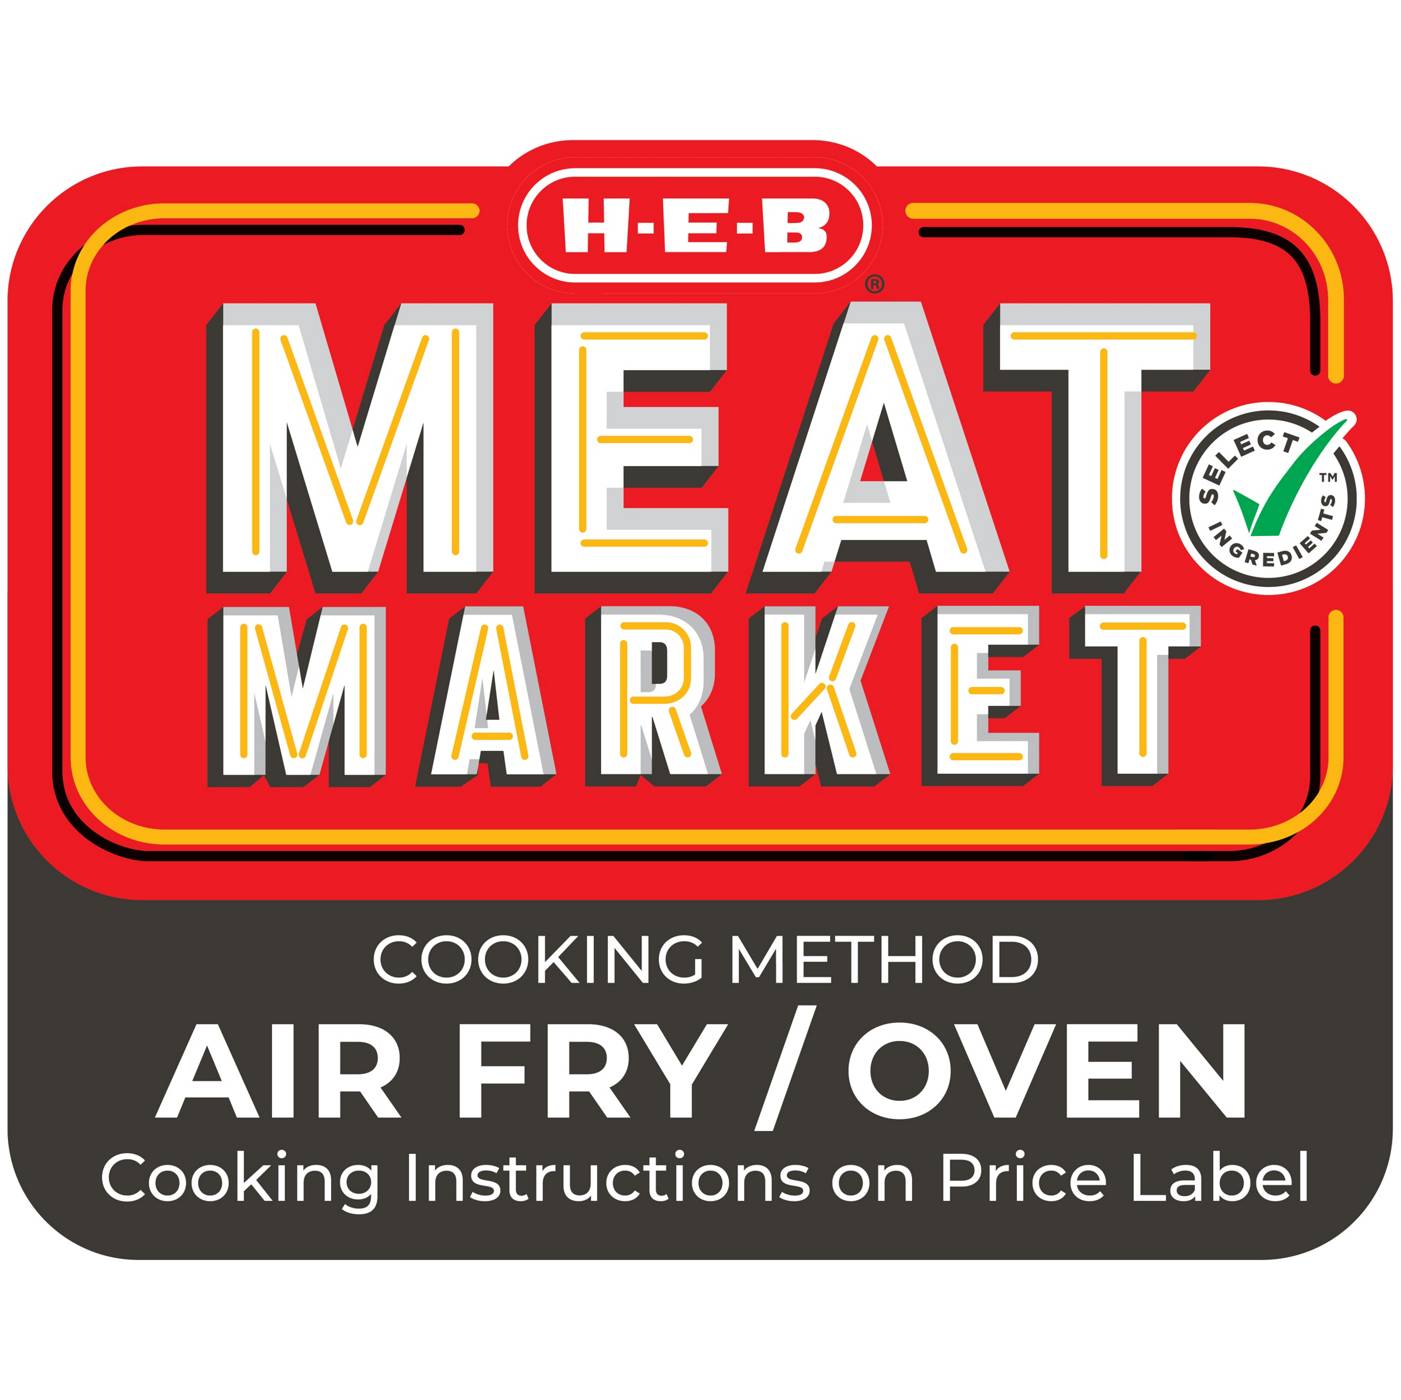 H-E-B Meat Market Marinated Whole Chicken Wings - Smoky BBQ - Texas-Size Pack; image 2 of 3